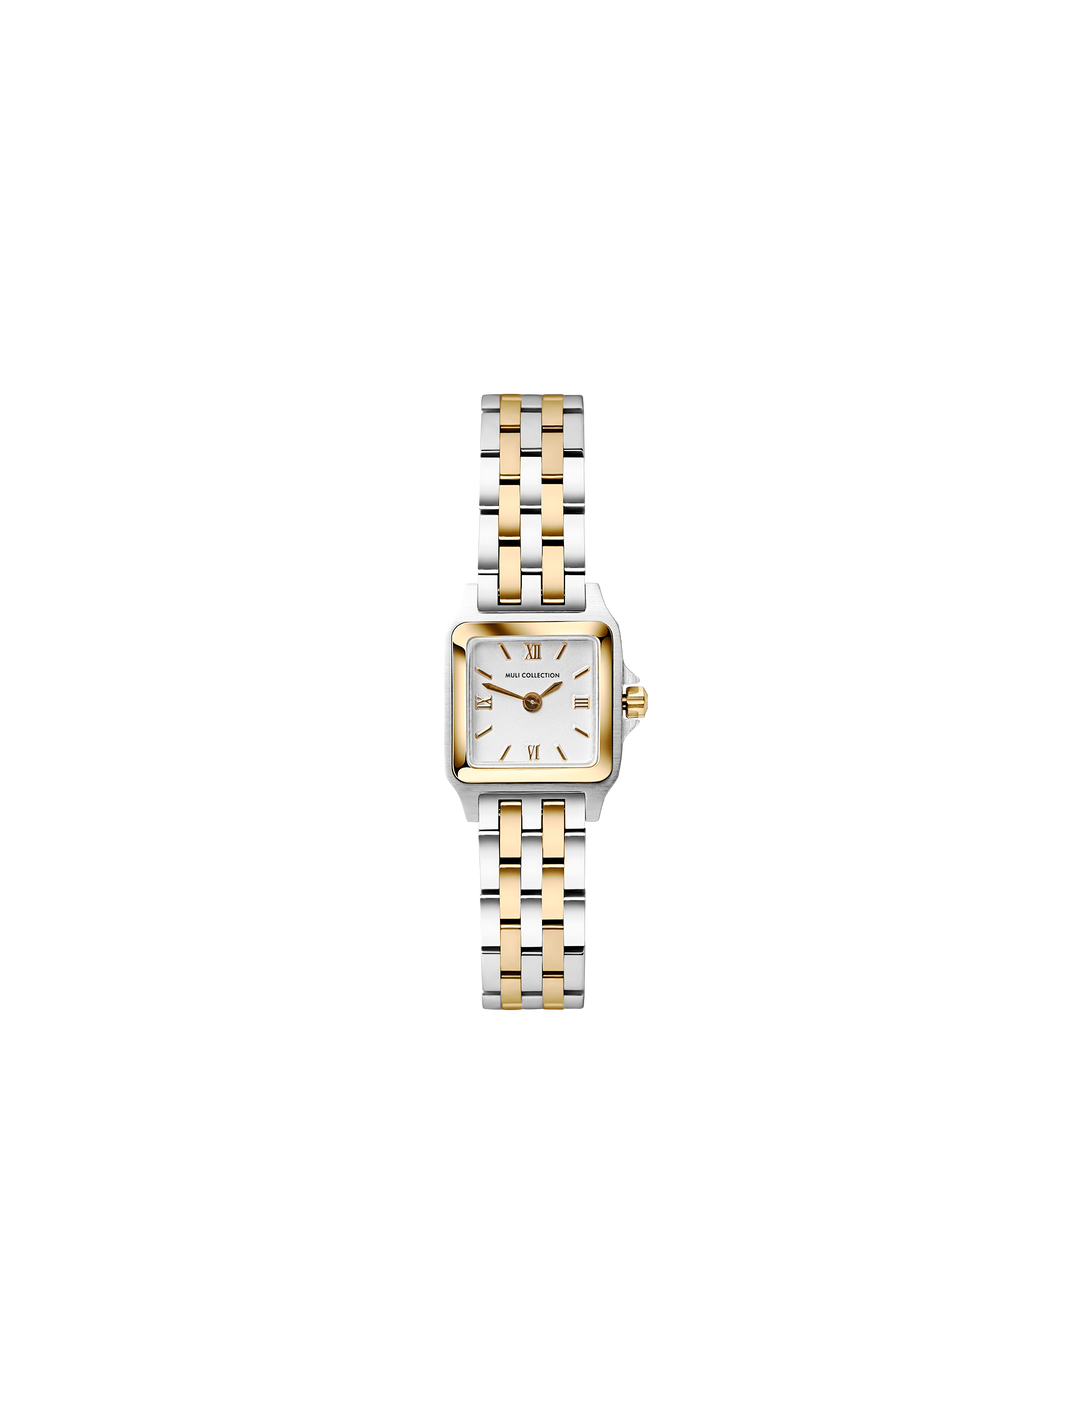 muli collection watch gold/silver